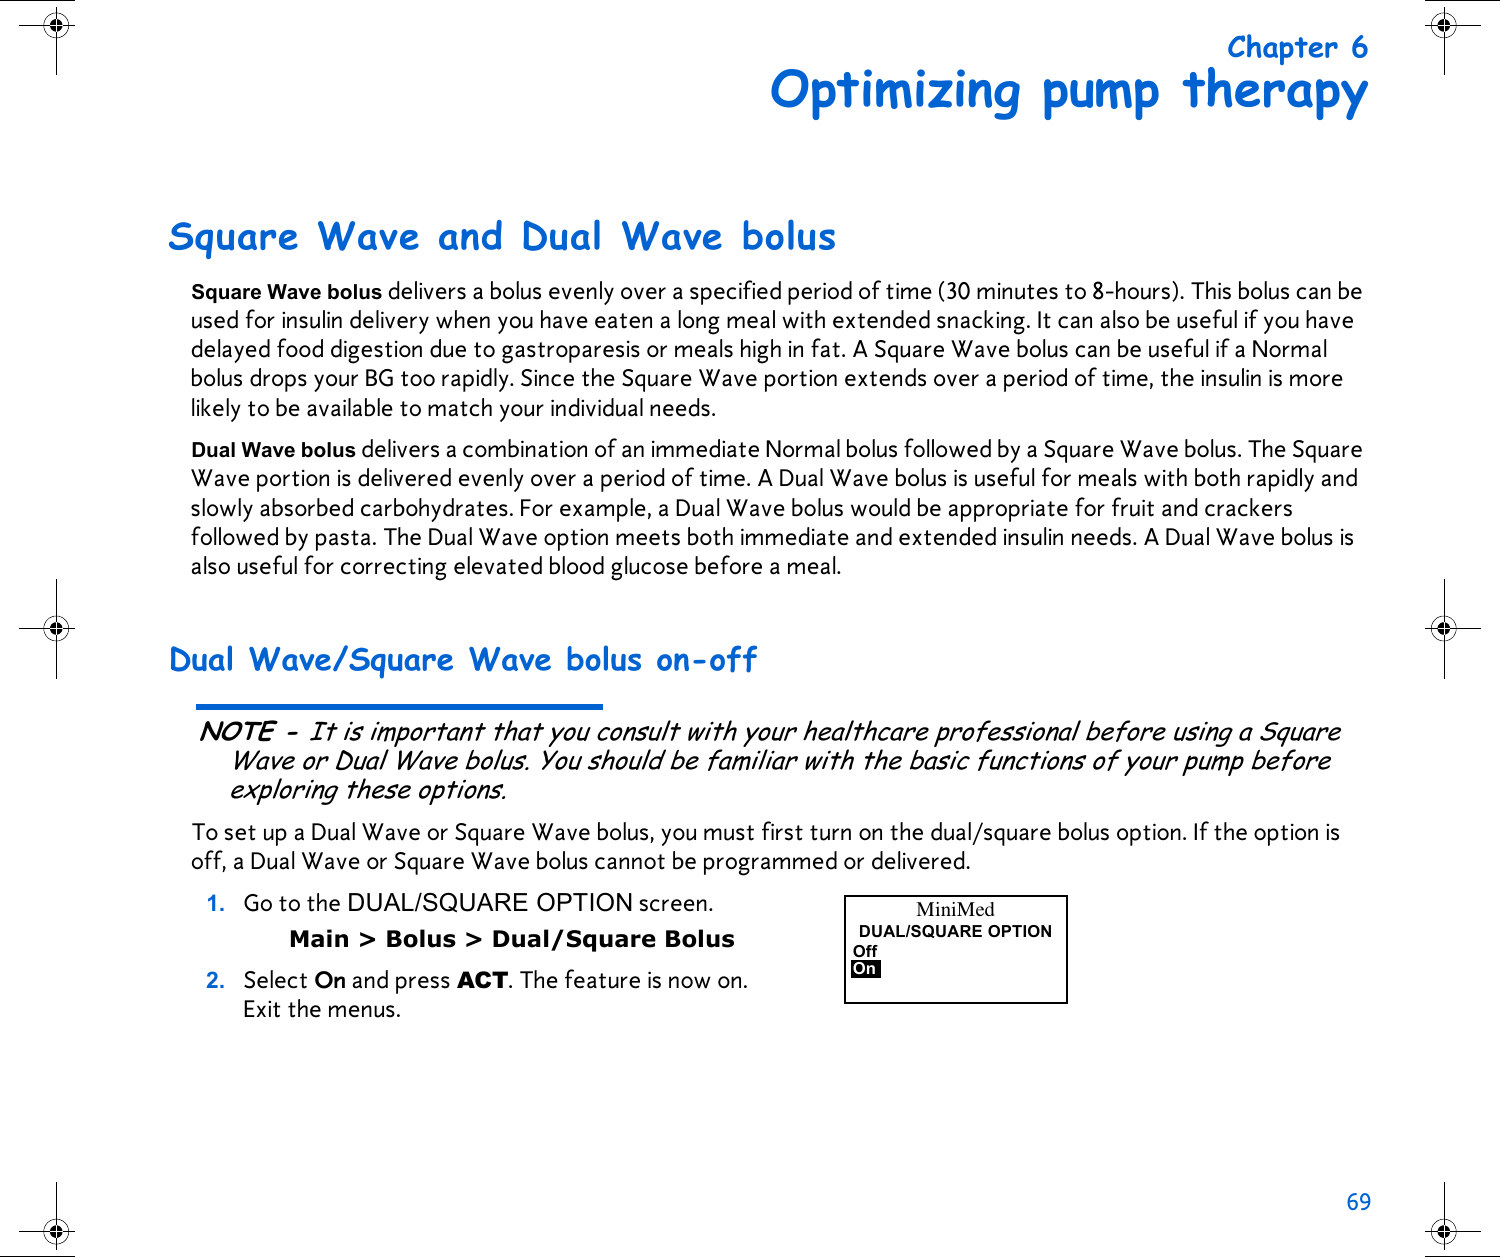 69 Chapter 6Optimizing pump therapySquare Wave and Dual Wave bolusSquare Wave bolus delivers a bolus evenly over a specified period of time (30 minutes to 8-hours). This bolus can be used for insulin delivery when you have eaten a long meal with extended snacking. It can also be useful if you have delayed food digestion due to gastroparesis or meals high in fat. A Square Wave bolus can be useful if a Normal bolus drops your BG too rapidly. Since the Square Wave portion extends over a period of time, the insulin is more likely to be available to match your individual needs. Dual Wave bolus delivers a combination of an immediate Normal bolus followed by a Square Wave bolus. The Square Wave portion is delivered evenly over a period of time. A Dual Wave bolus is useful for meals with both rapidly and slowly absorbed carbohydrates. For example, a Dual Wave bolus would be appropriate for fruit and crackers followed by pasta. The Dual Wave option meets both immediate and extended insulin needs. A Dual Wave bolus is also useful for correcting elevated blood glucose before a meal. Dual Wave/Square Wave bolus on-offNOTE - It is important that you consult with your healthcare professional before using a Square Wave or Dual Wave bolus. You should be familiar with the basic functions of your pump before exploring these options.To set up a Dual Wave or Square Wave bolus, you must first turn on the dual/square bolus option. If the option is off, a Dual Wave or Square Wave bolus cannot be programmed or delivered. 1. Go to the DUAL/SQUARE OPTION screen. Main &gt; Bolus &gt; Dual/Square Bolus2. Select On and press ACT. The feature is now on. Exit the menus.MiniMedDUAL/SQUARE OPTIONOffOn